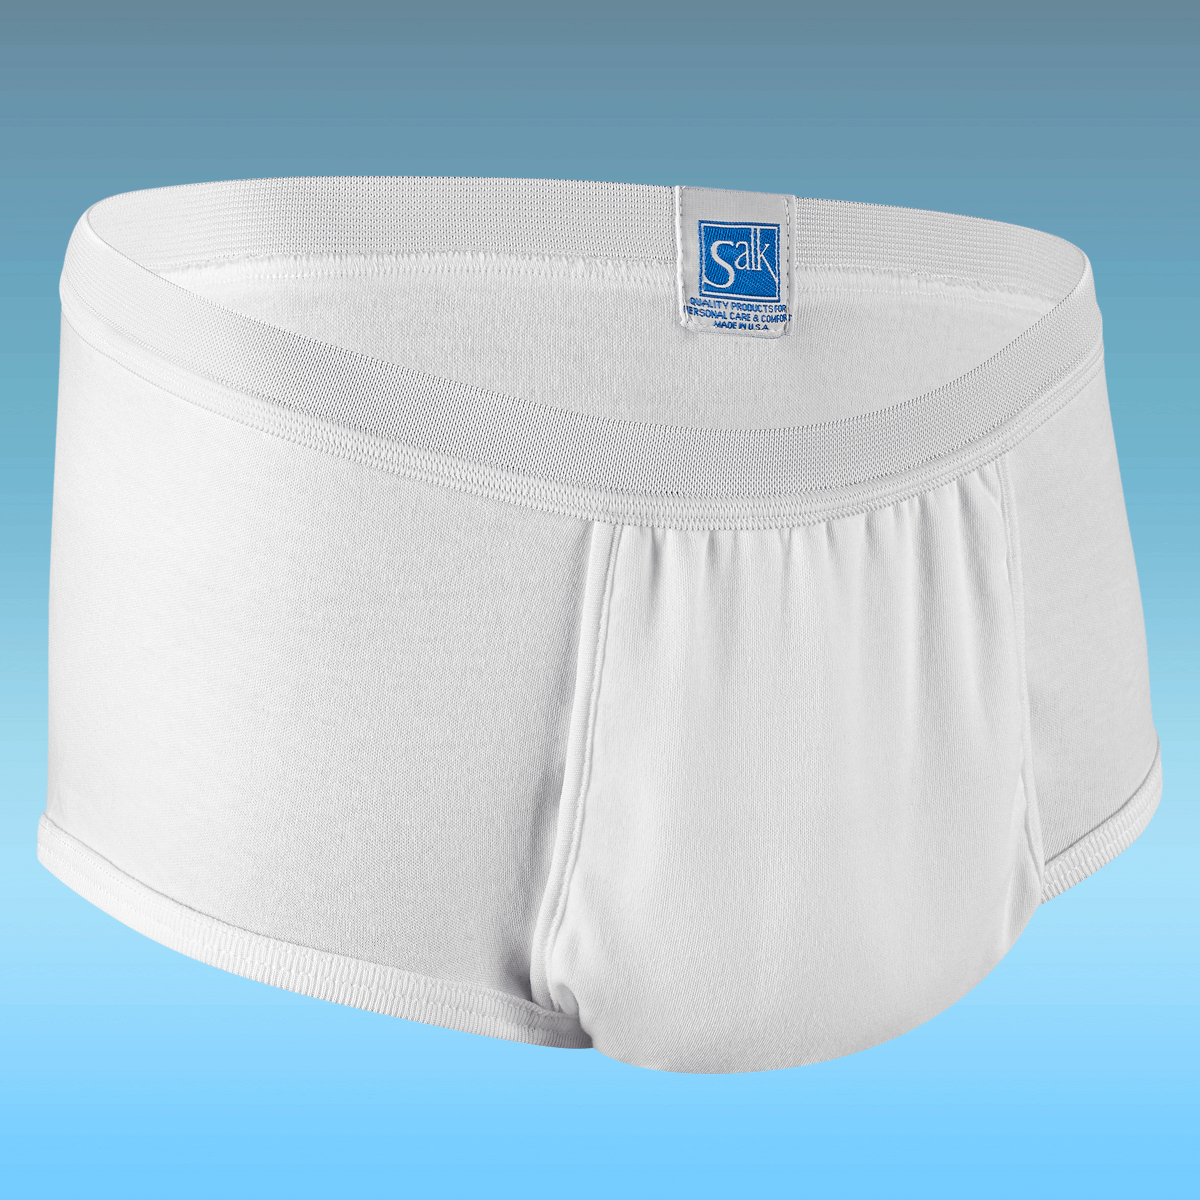 Reusable Incontinence Underwear for Men - China Adult Diaper and